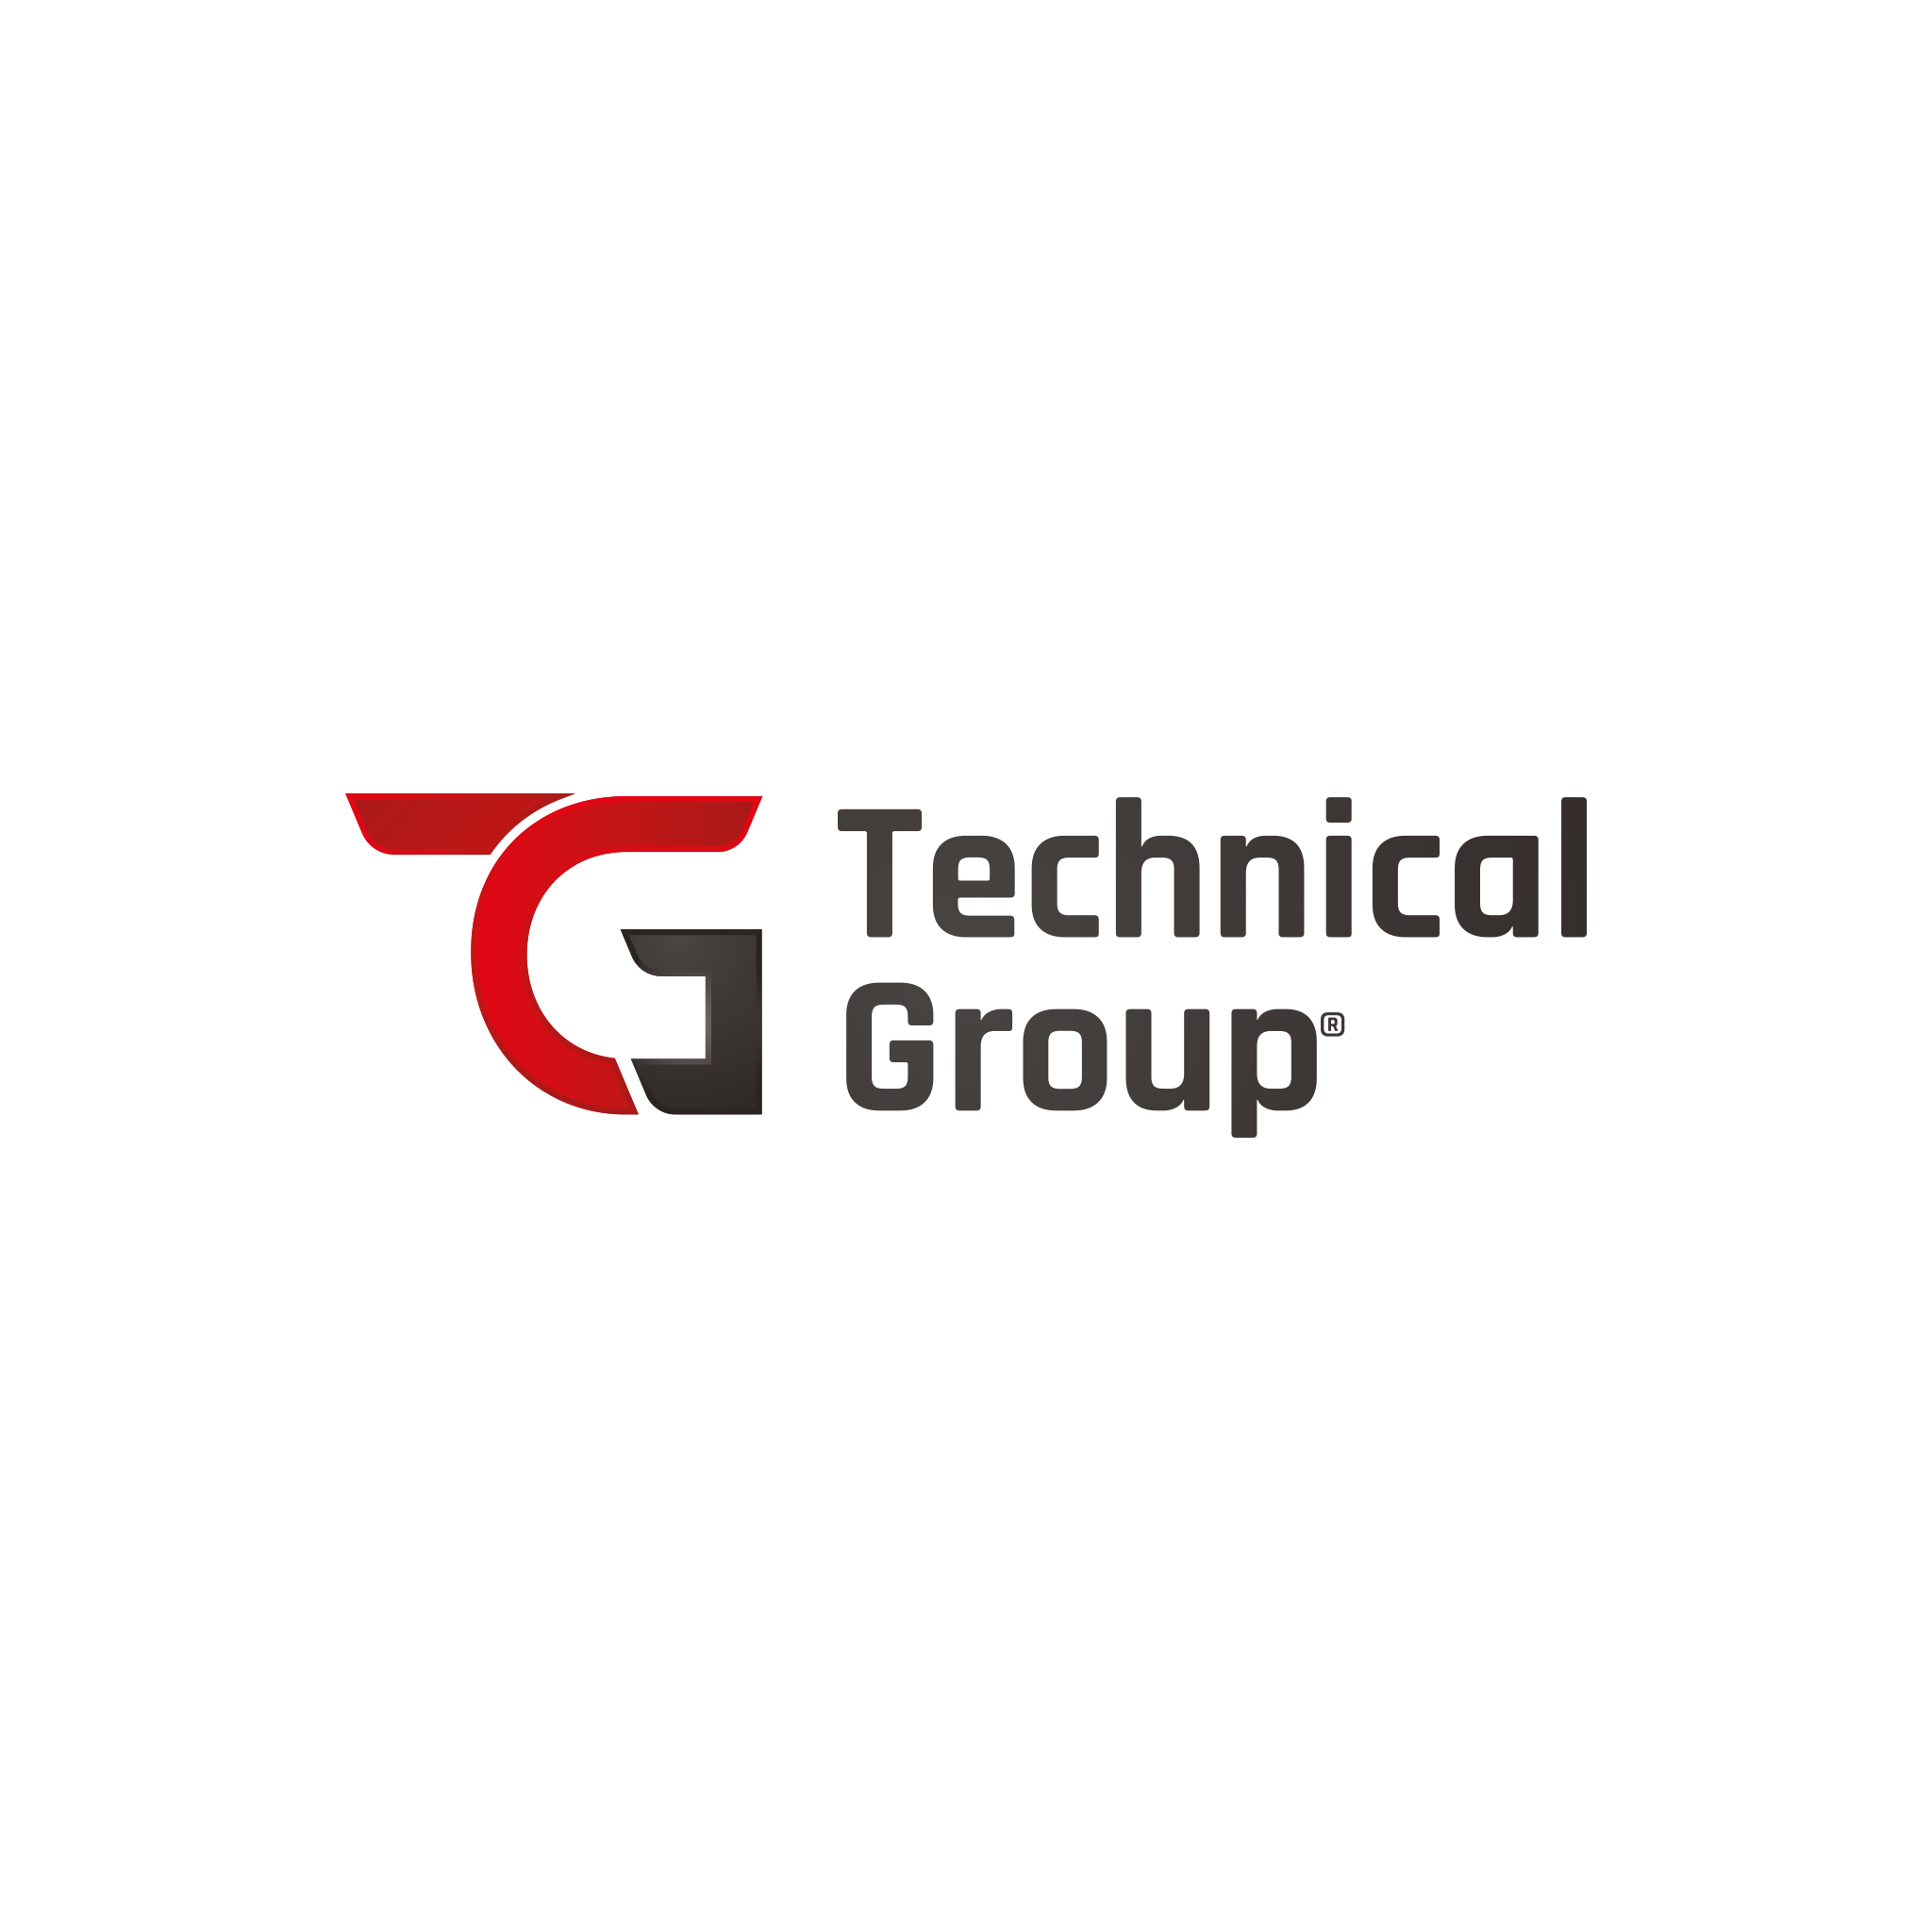 TG Technical Group